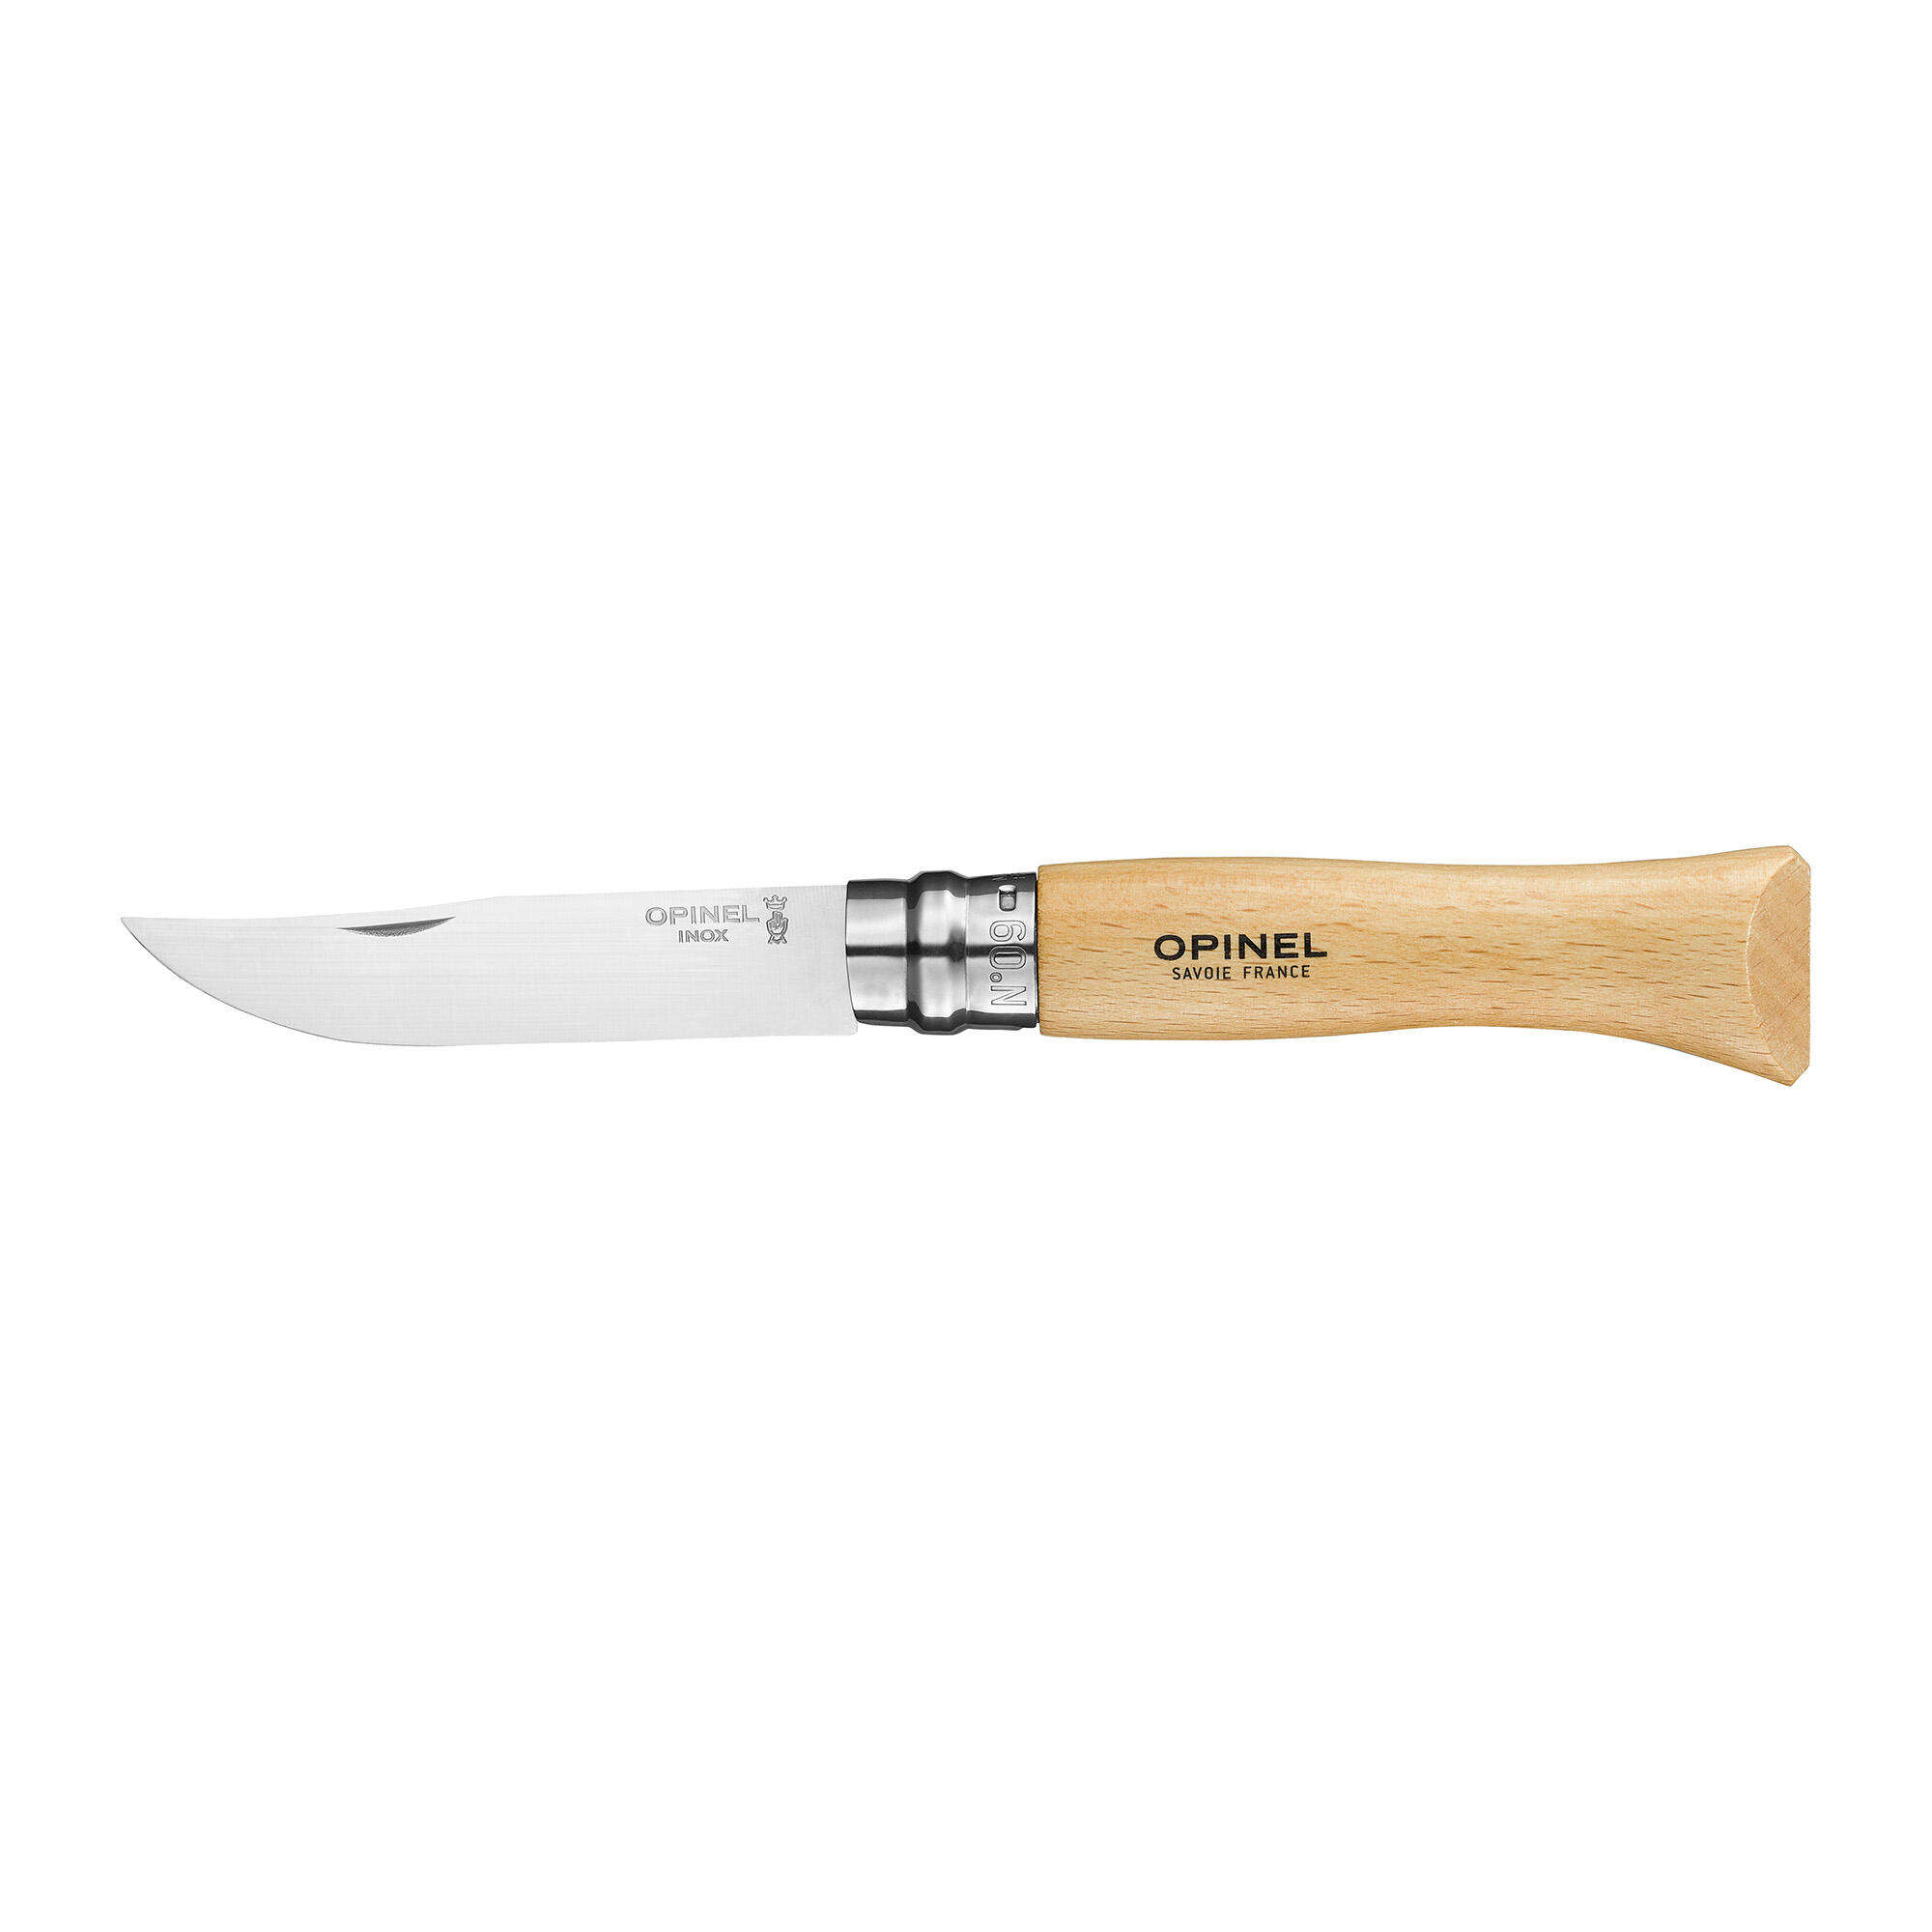 Knife　Decathlon　Opinel　No.　Folding　Stainless-Steel　cm　Hunting